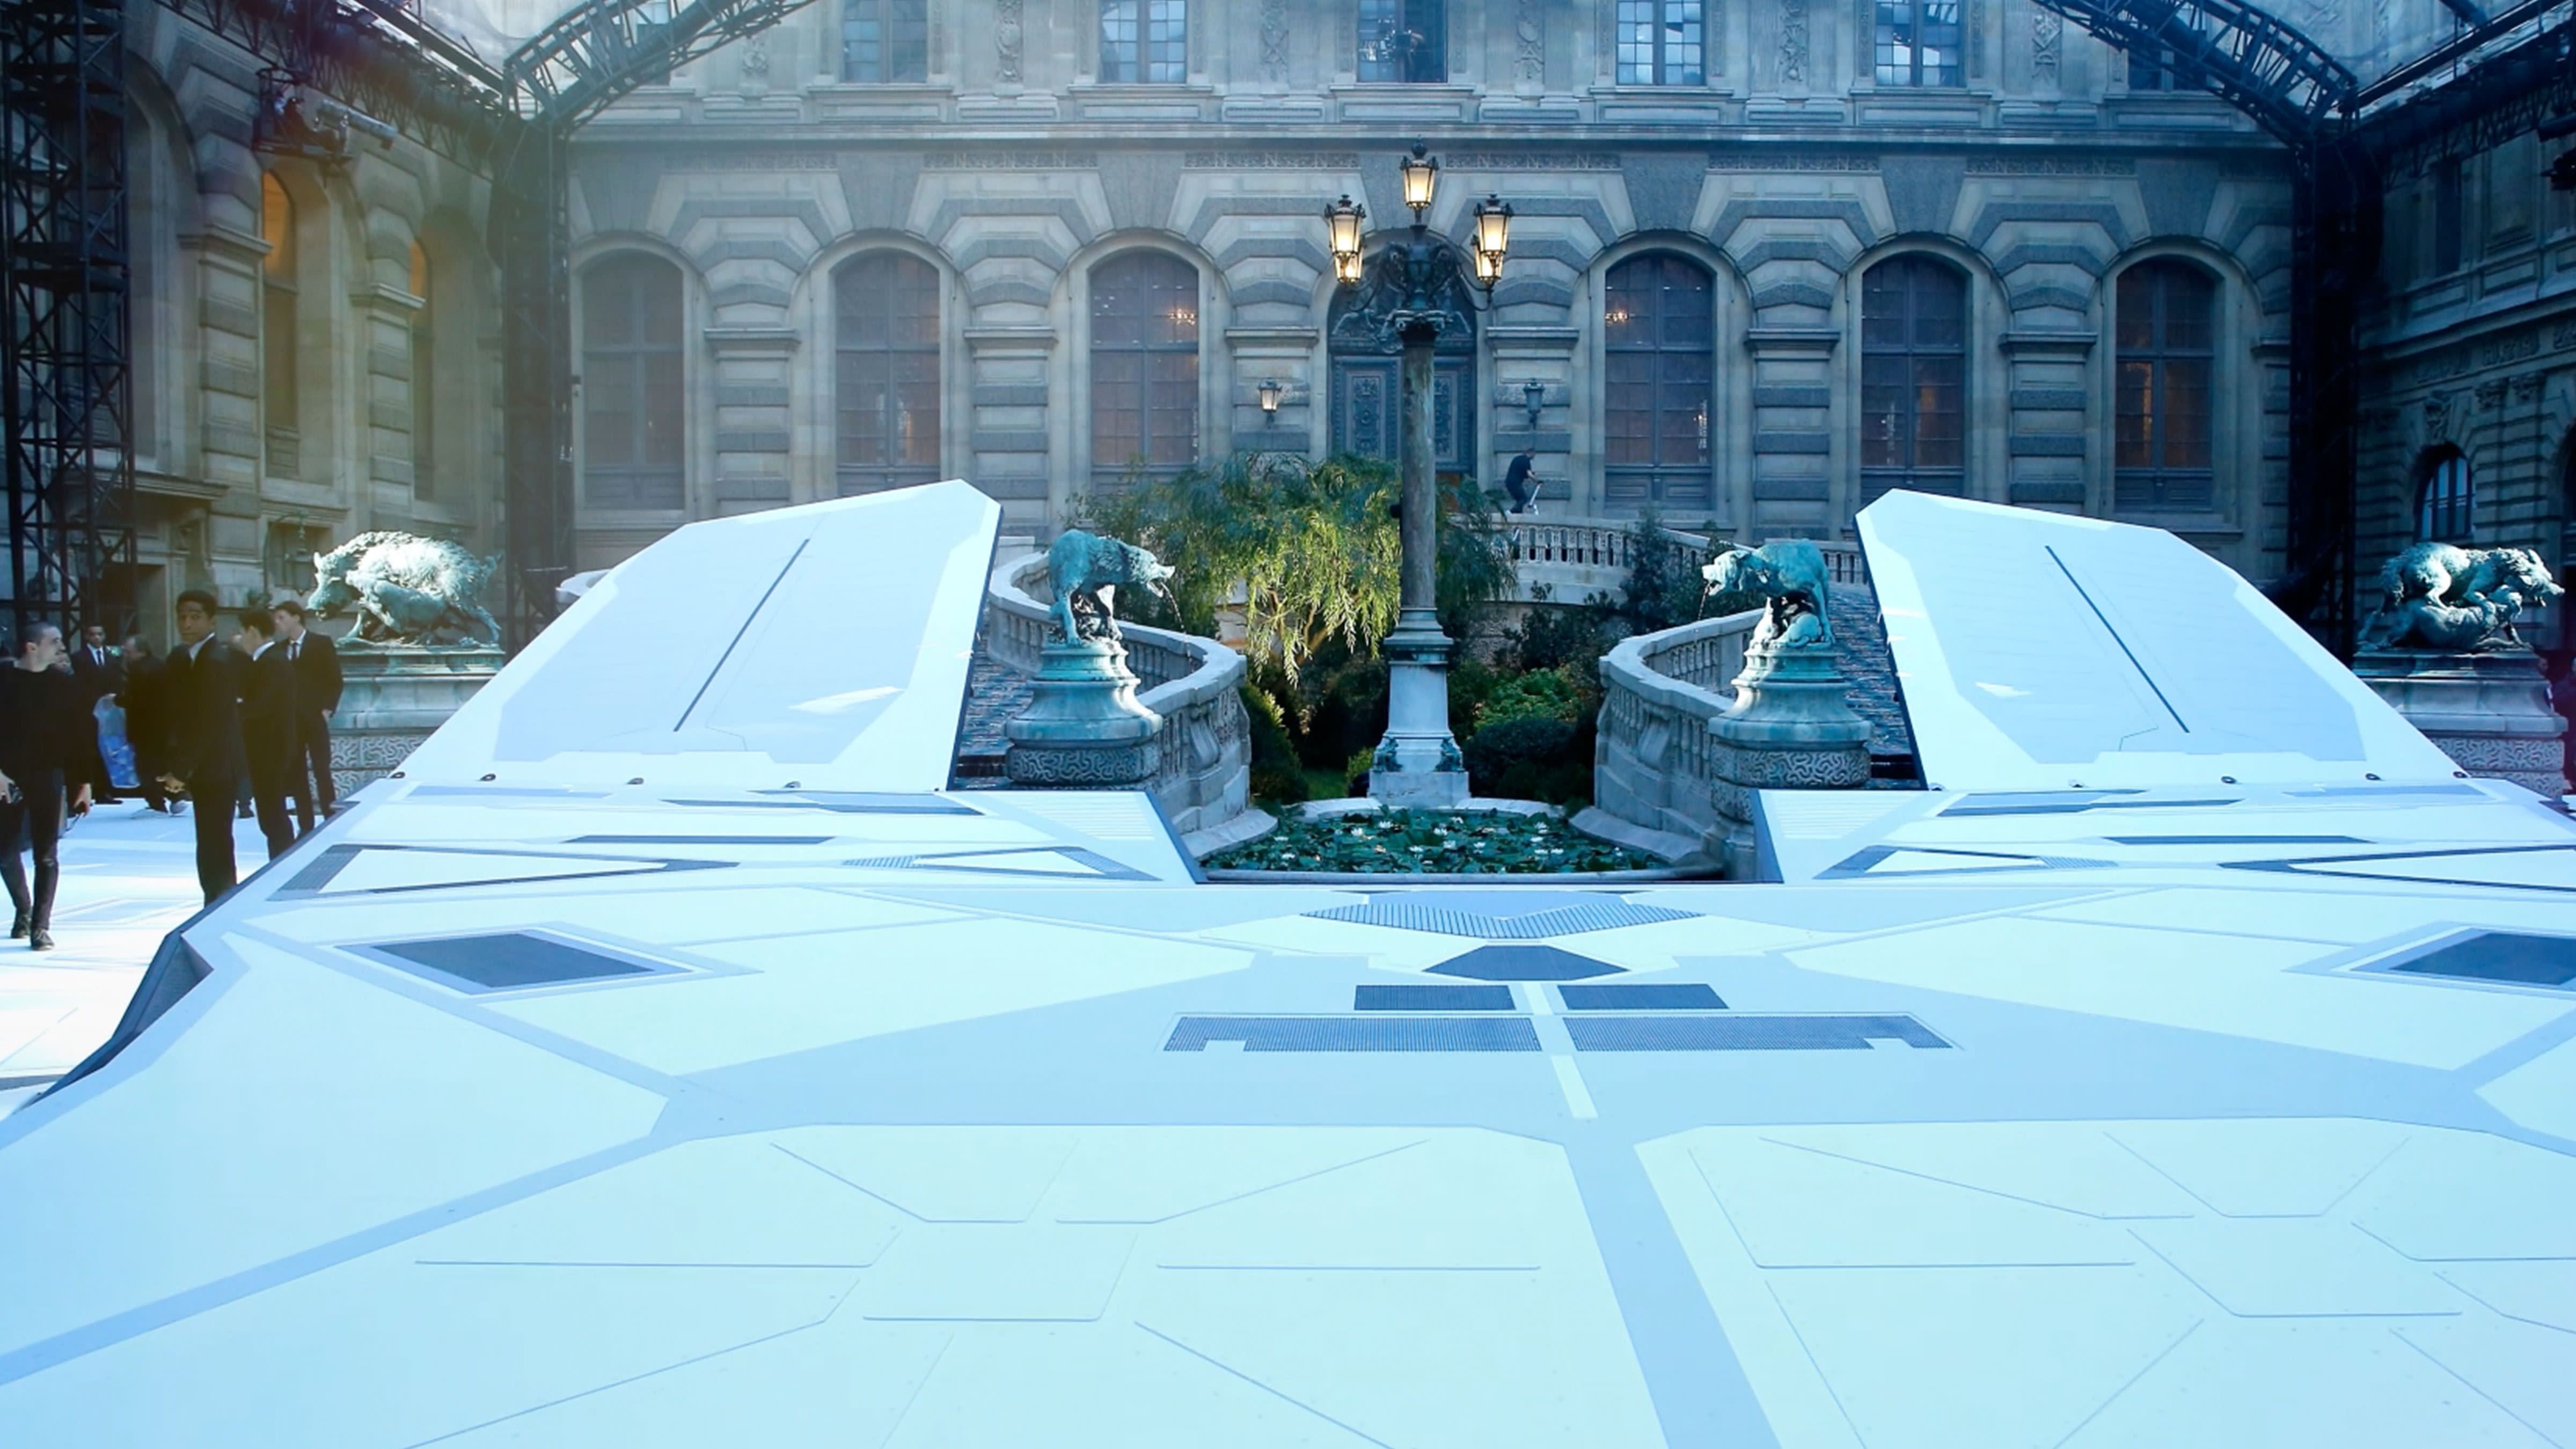 Louis Vuitton Lands a Spaceship on the Louvre